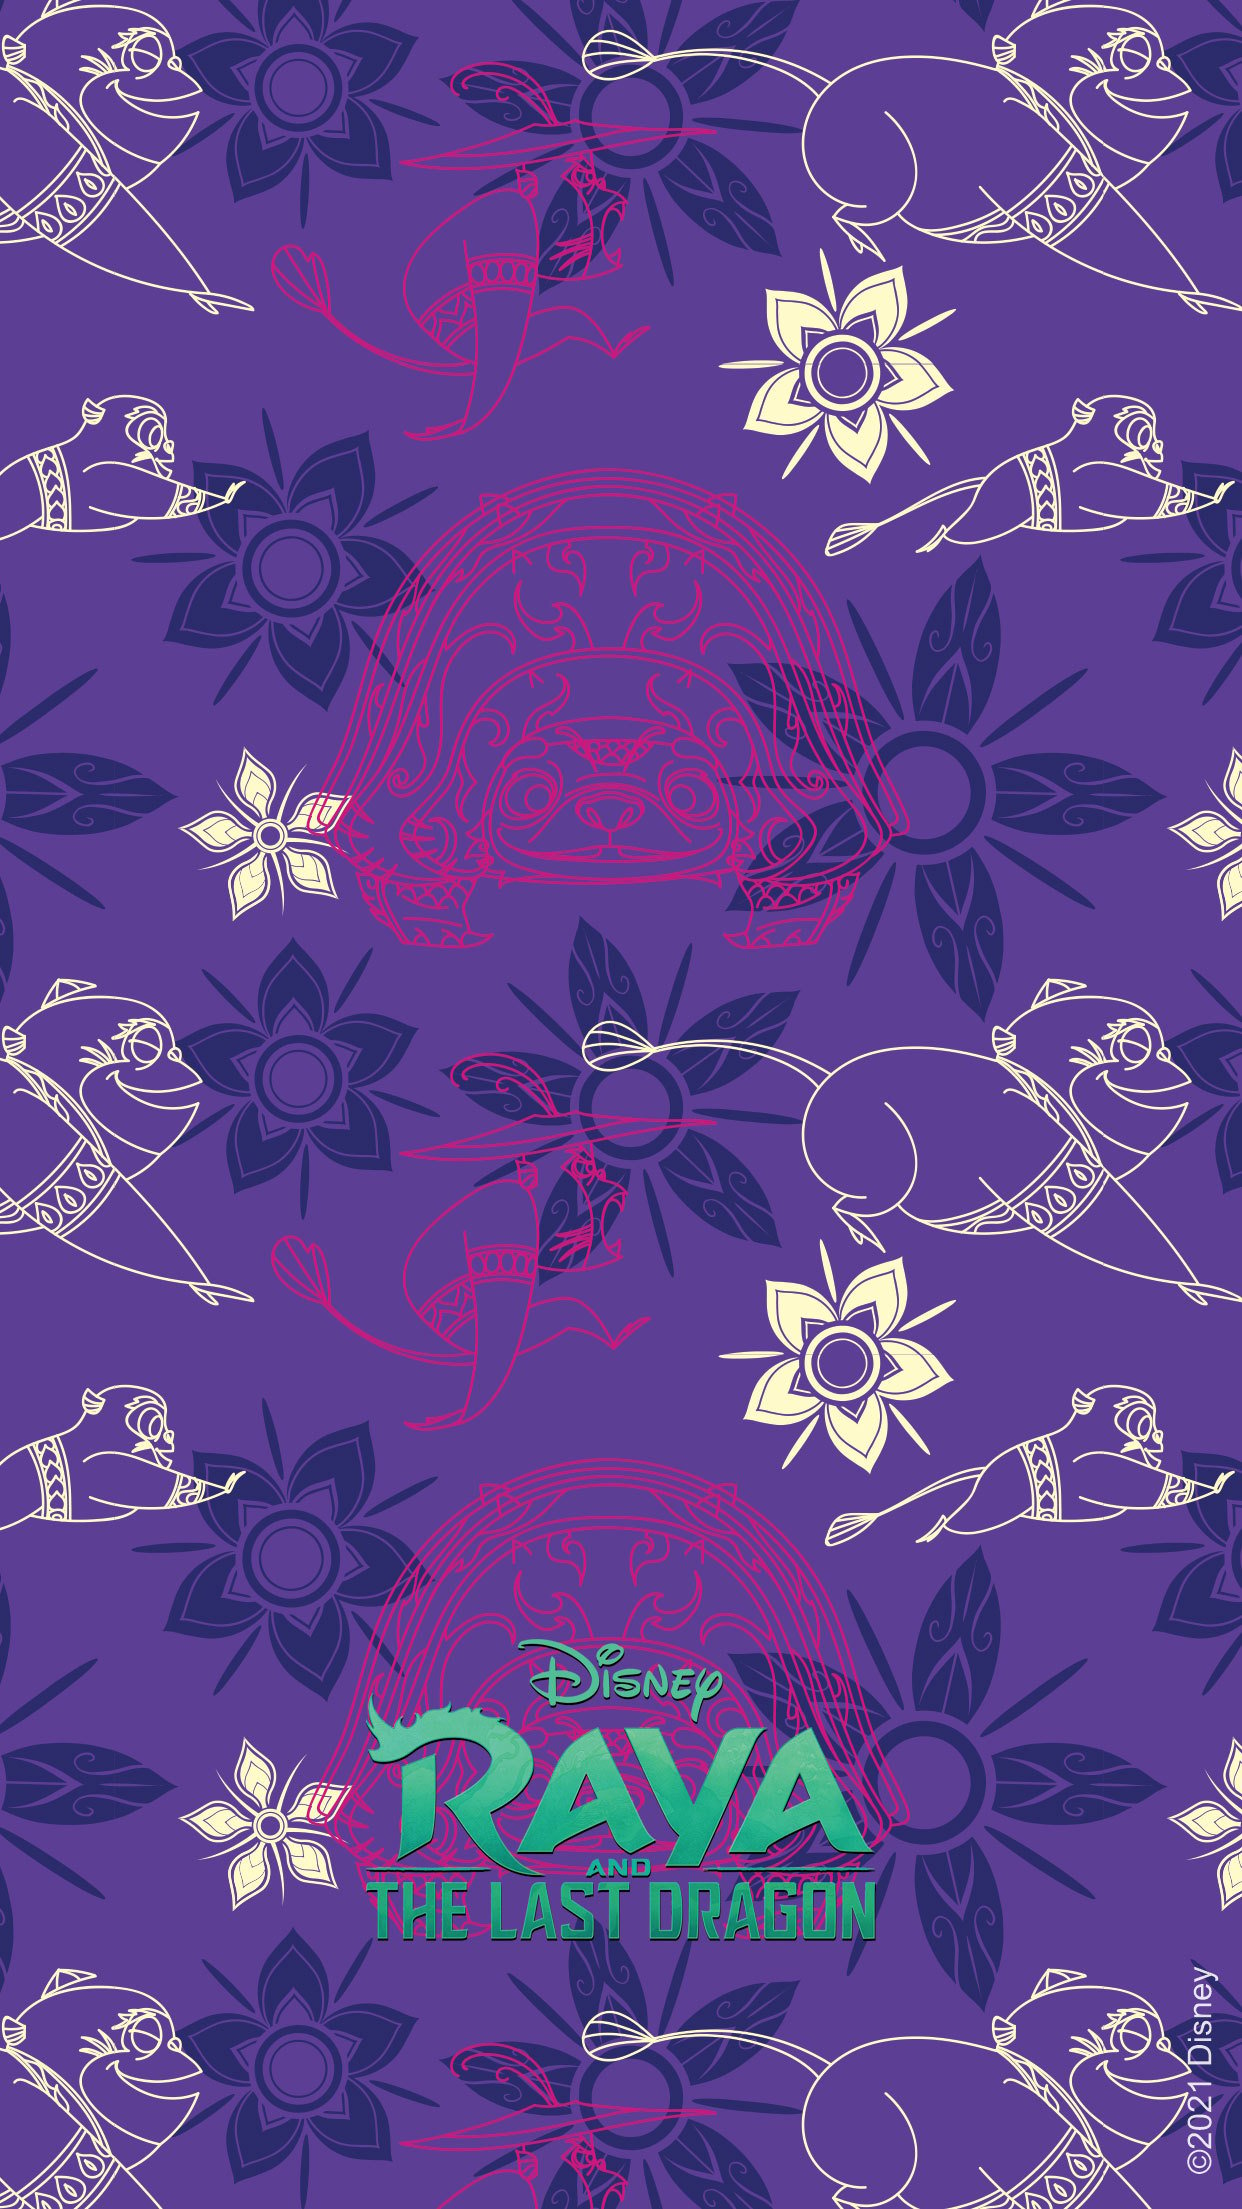 Get Into The Spirit Of Disney's Raya And The Last Dragon With These Mobile Wallpaper